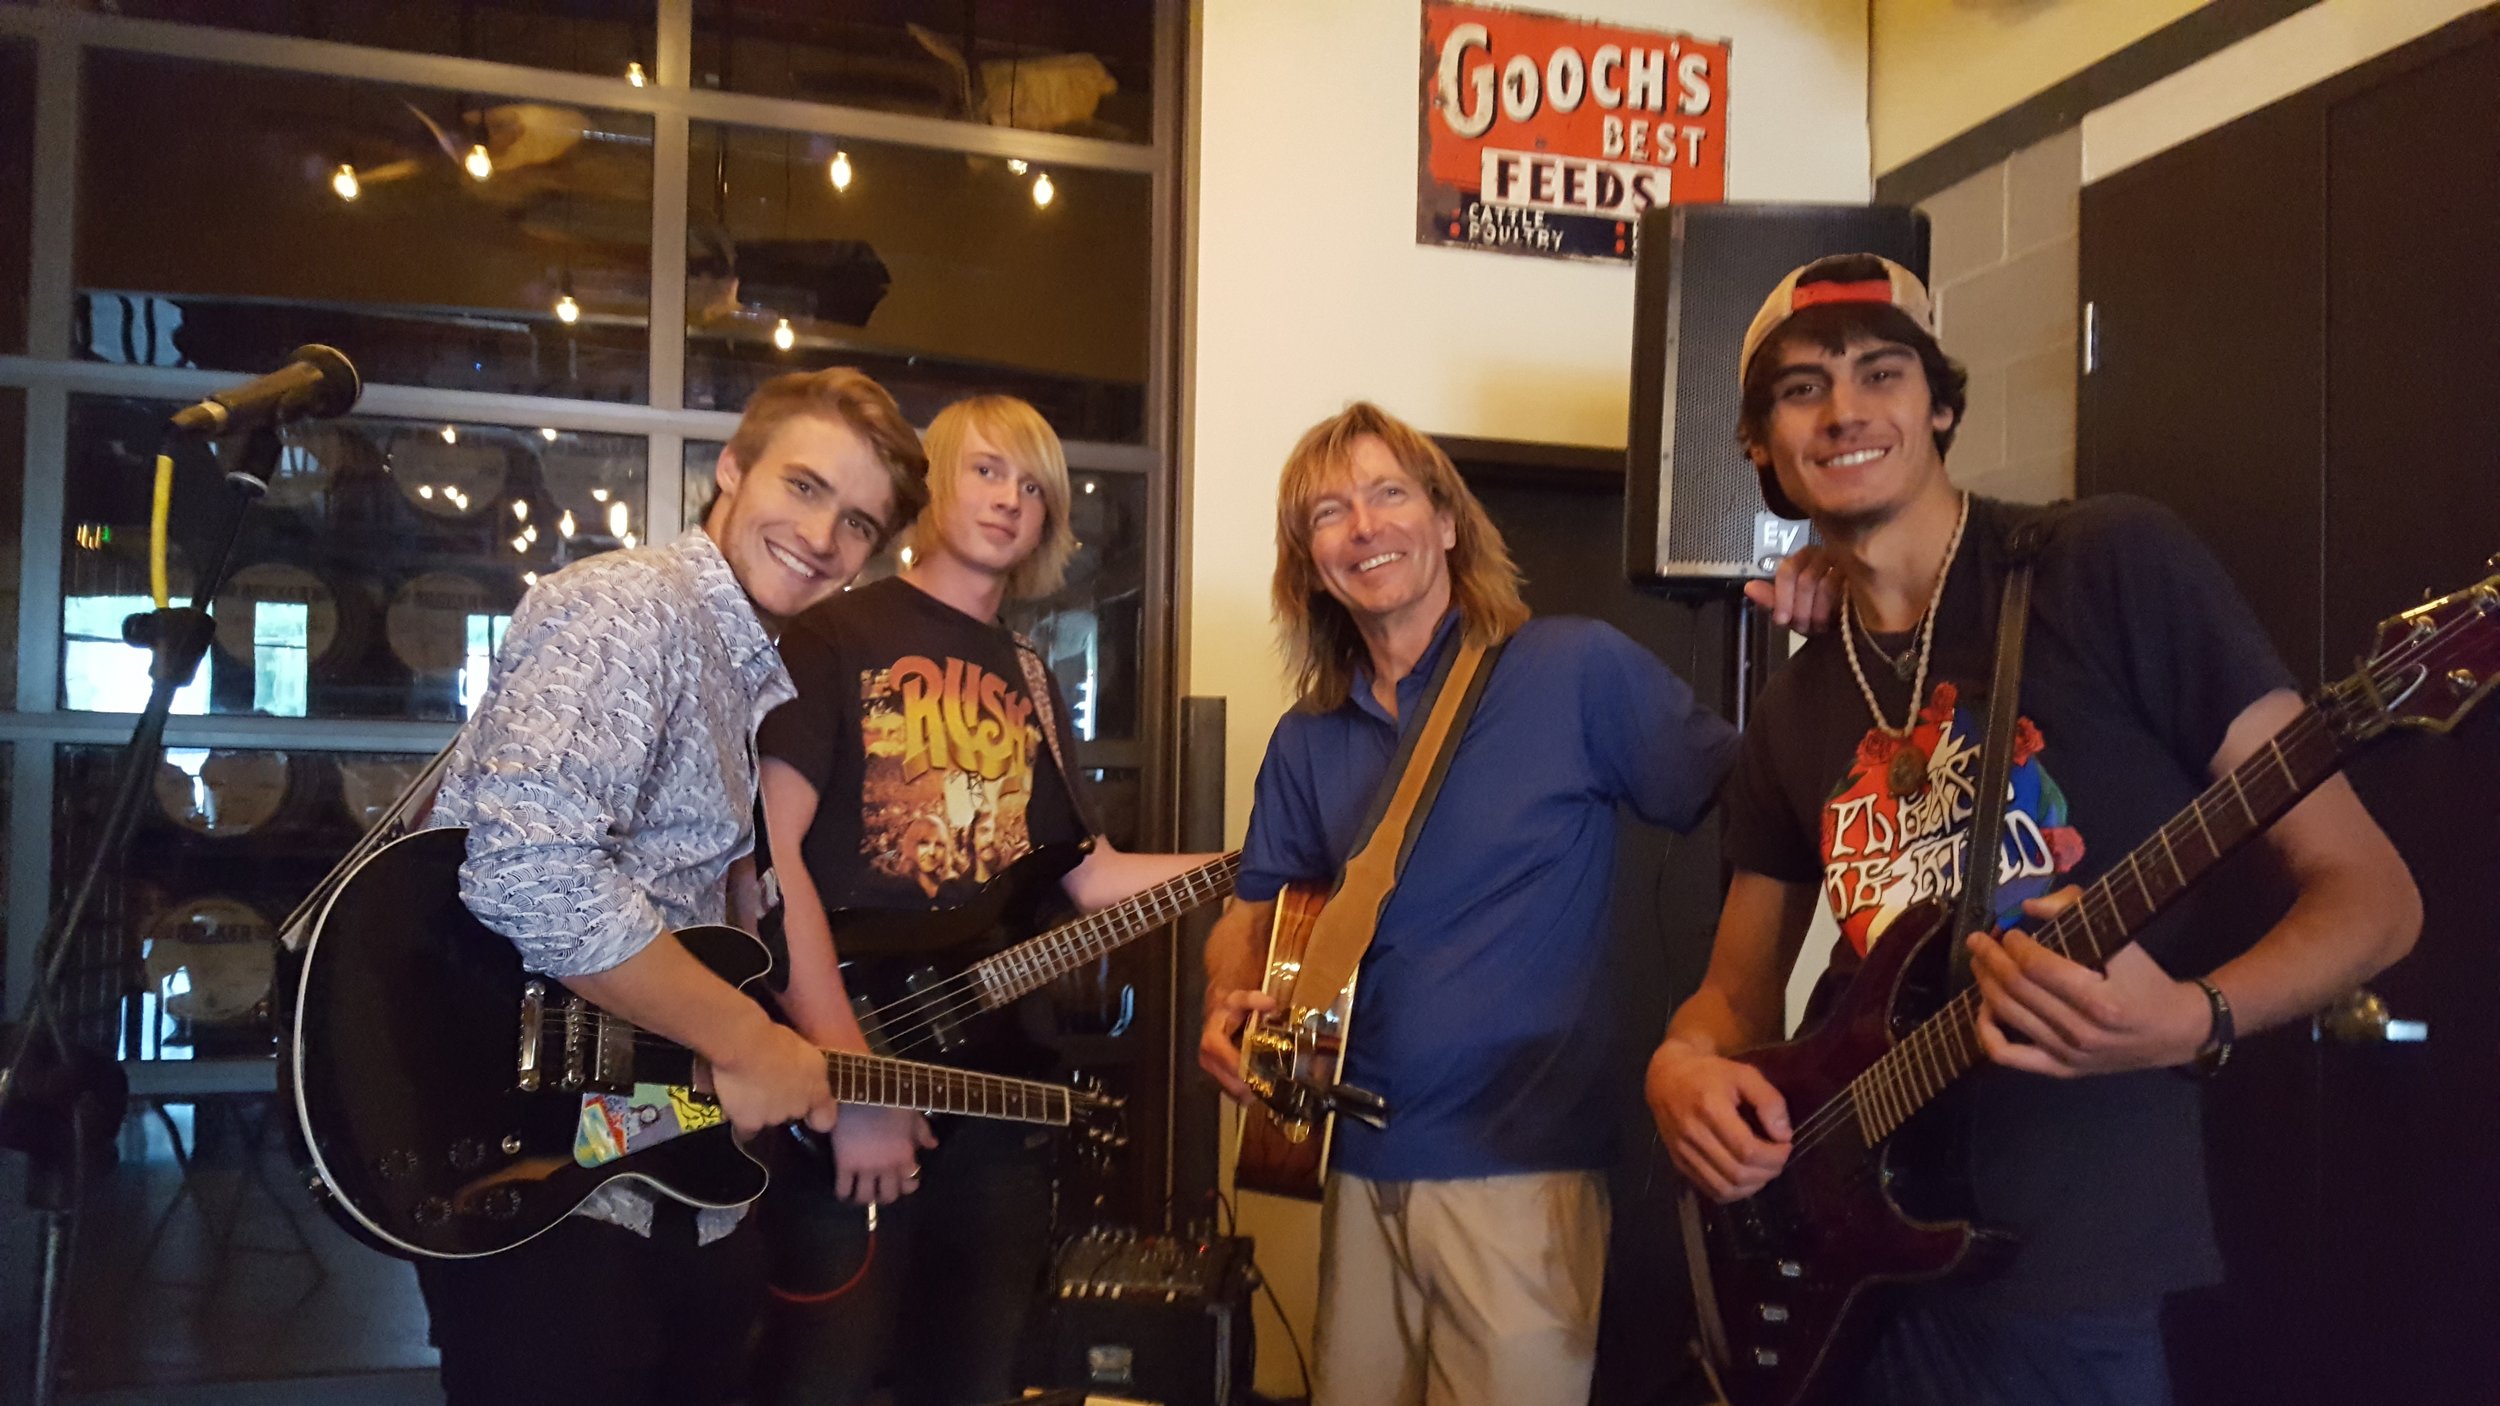    Teen electric guitar students perform with teacher.   